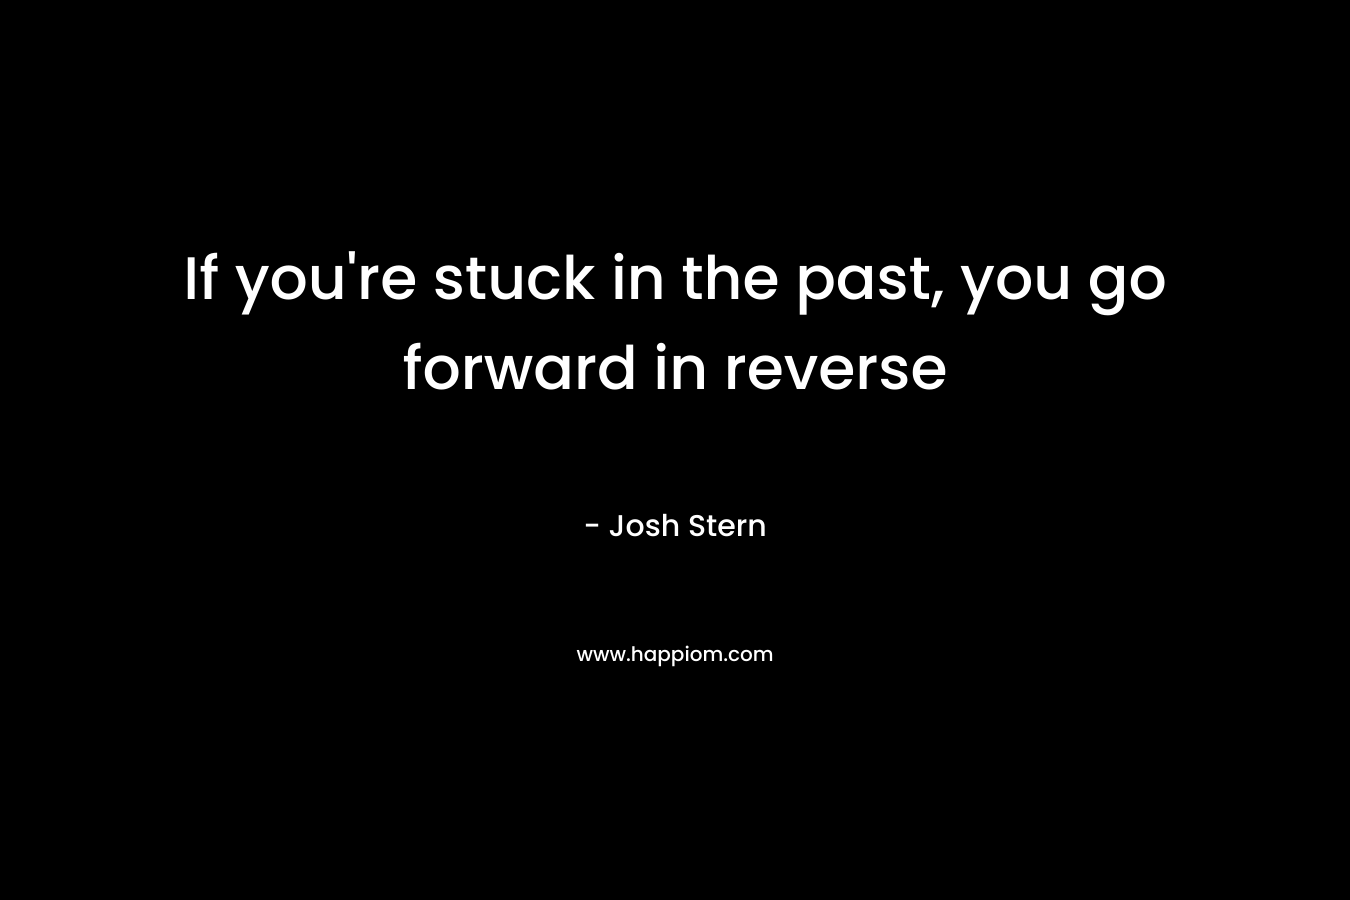 If you're stuck in the past, you go forward in reverse